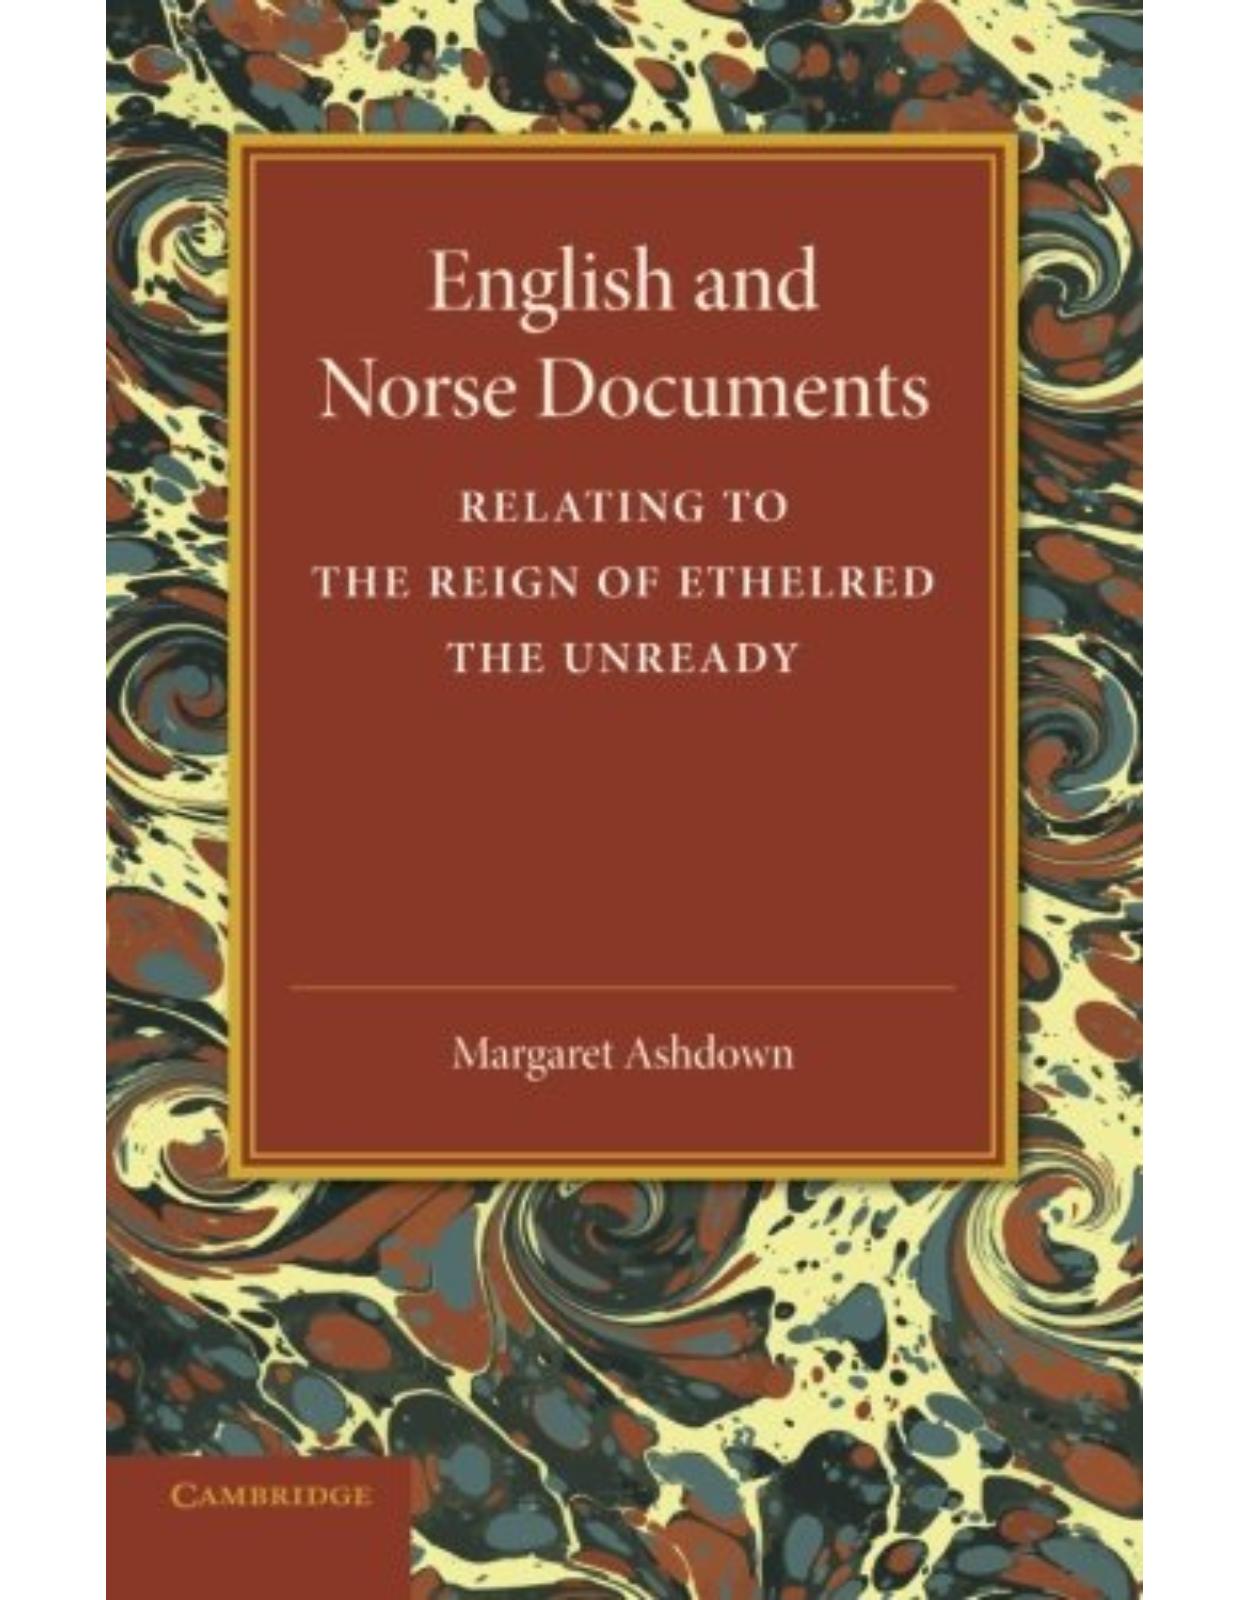 English and Norse Documents: Relating to the Reign of Ethelred the Unready